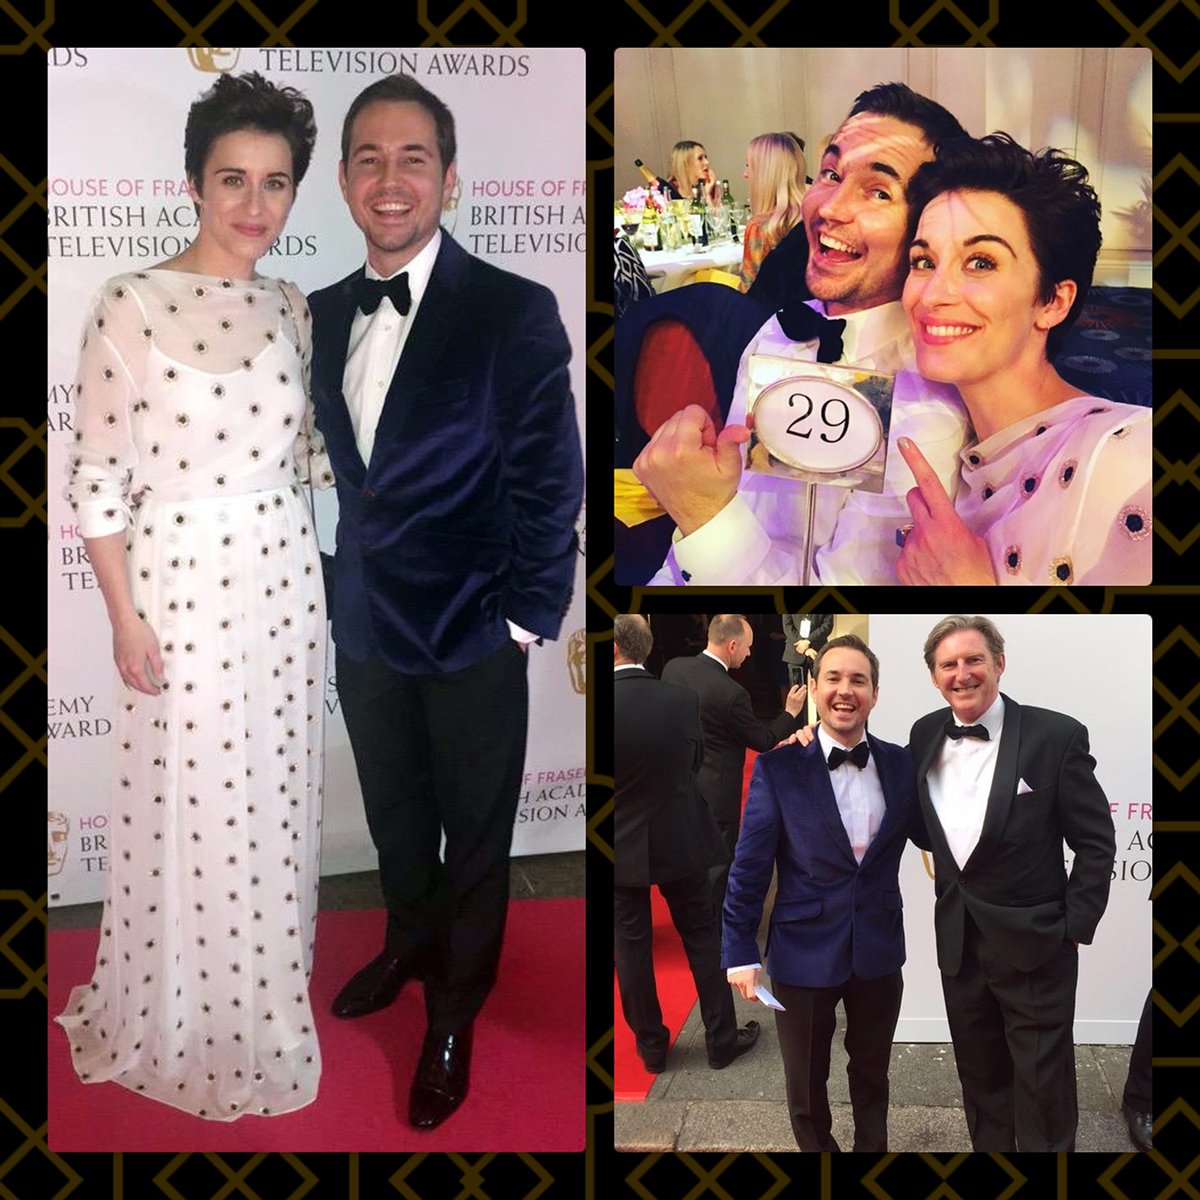 PIC OF THE DAY Some great shots of the LOD Team looking very dapper & elegant at the BAFTA TV Awards.  How very cool that they even got given table 29 😁❤️ ~ May 2015 #MartinCompston @martin_compston #LineOfDuty #VickyMcClure #AdrianDunbar